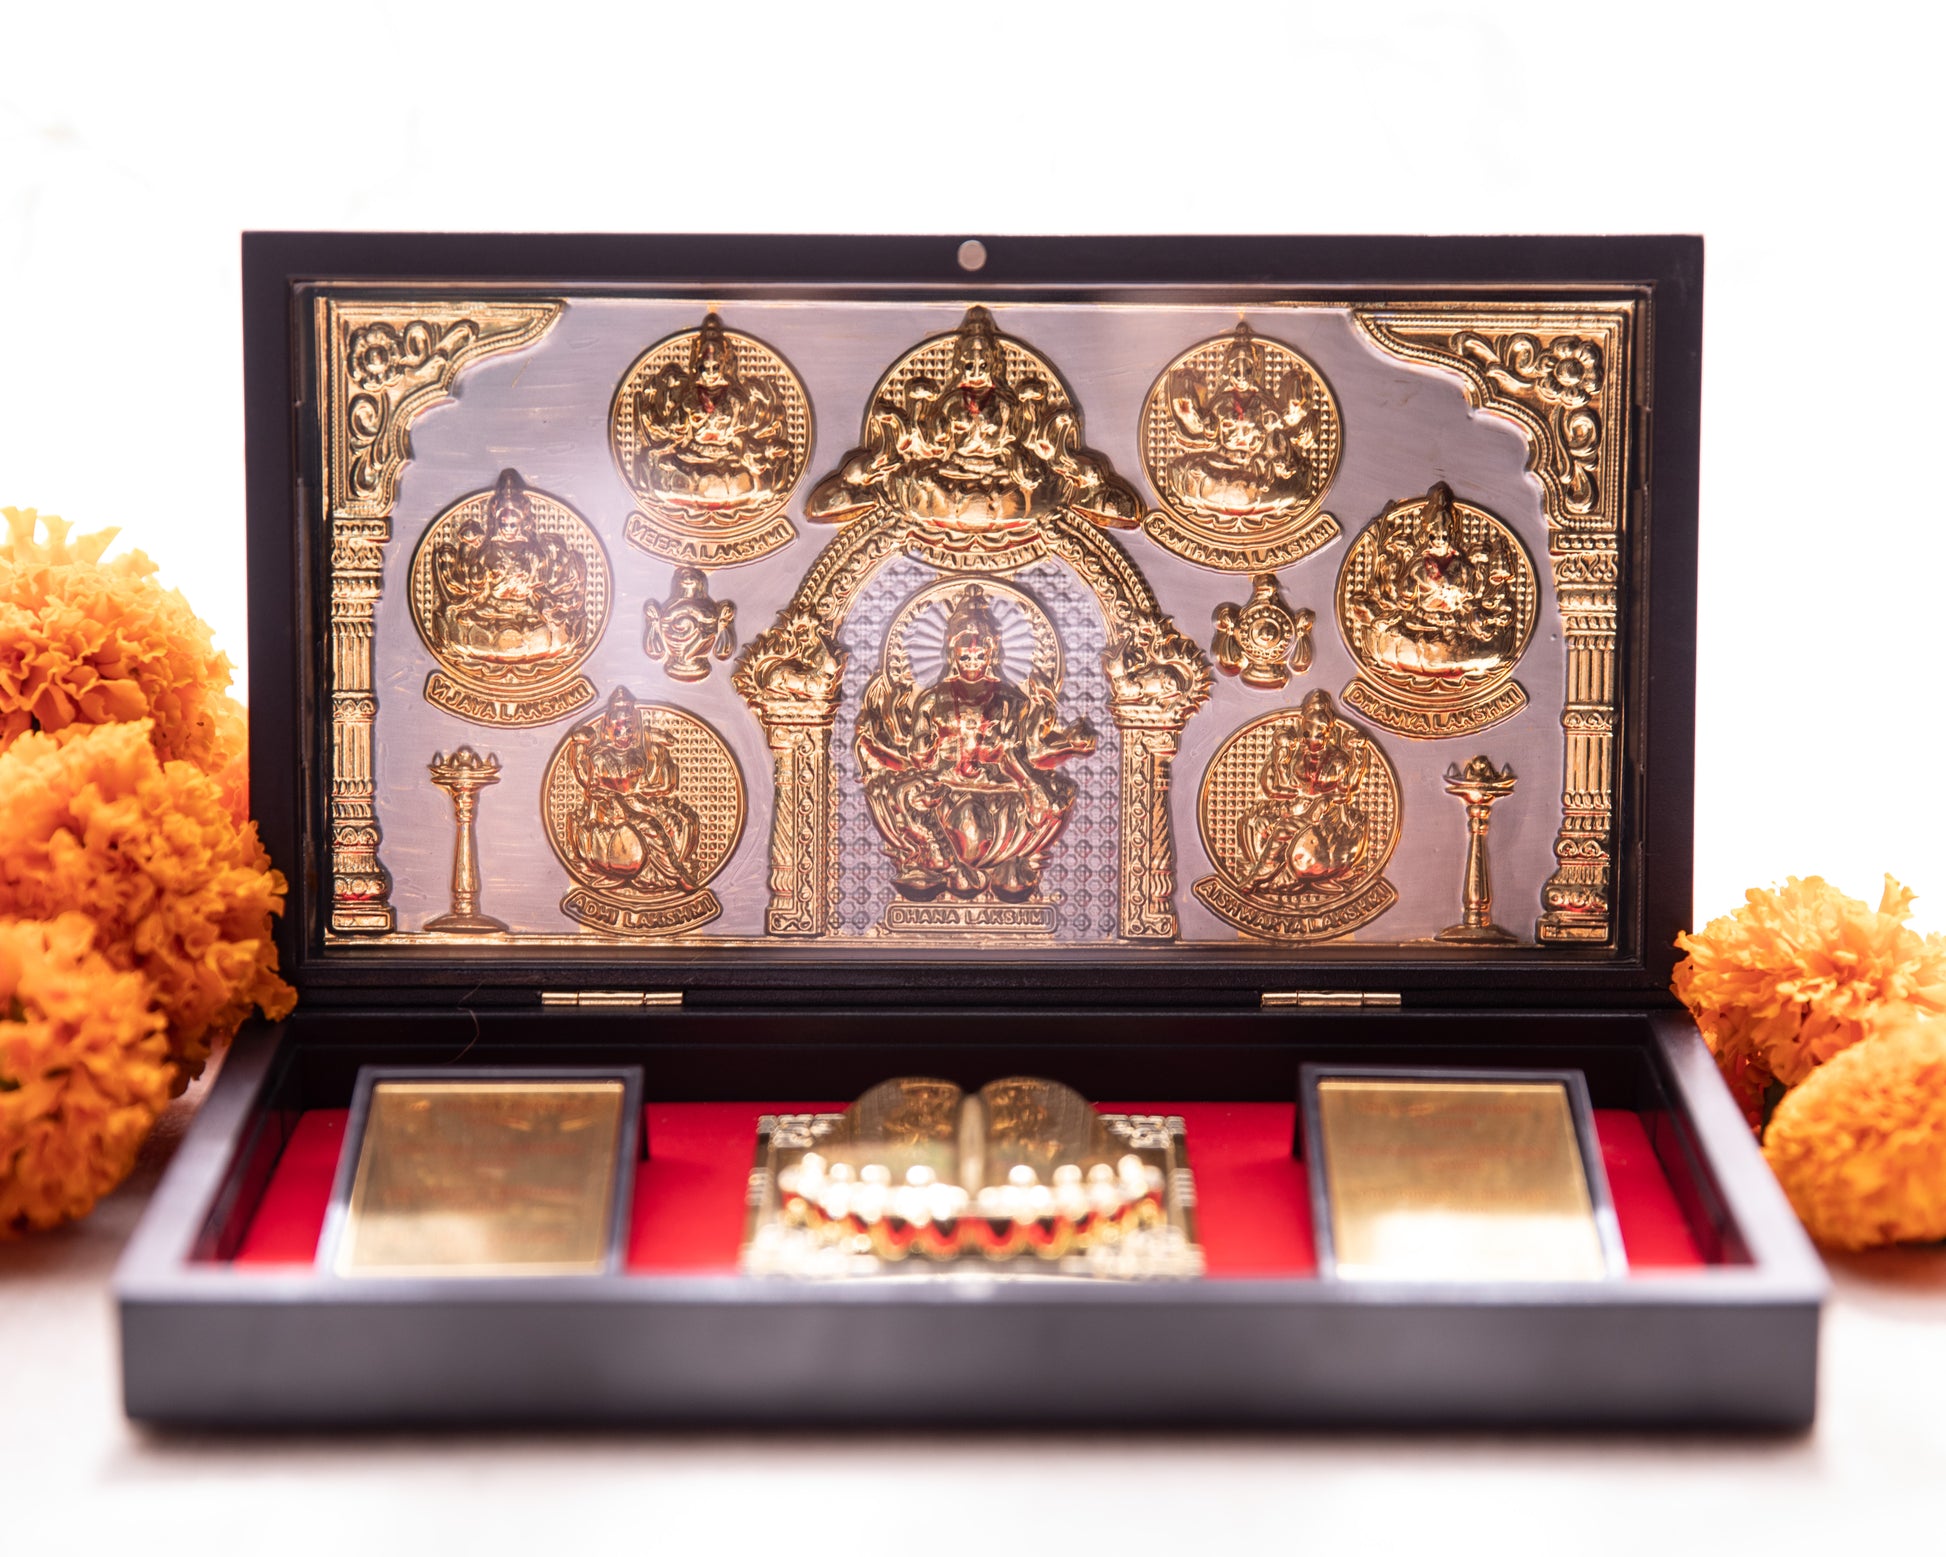 This Pooja Box is made from wood, all the symbolism and imagery seen within has been wrapped in 24KT gold foil.